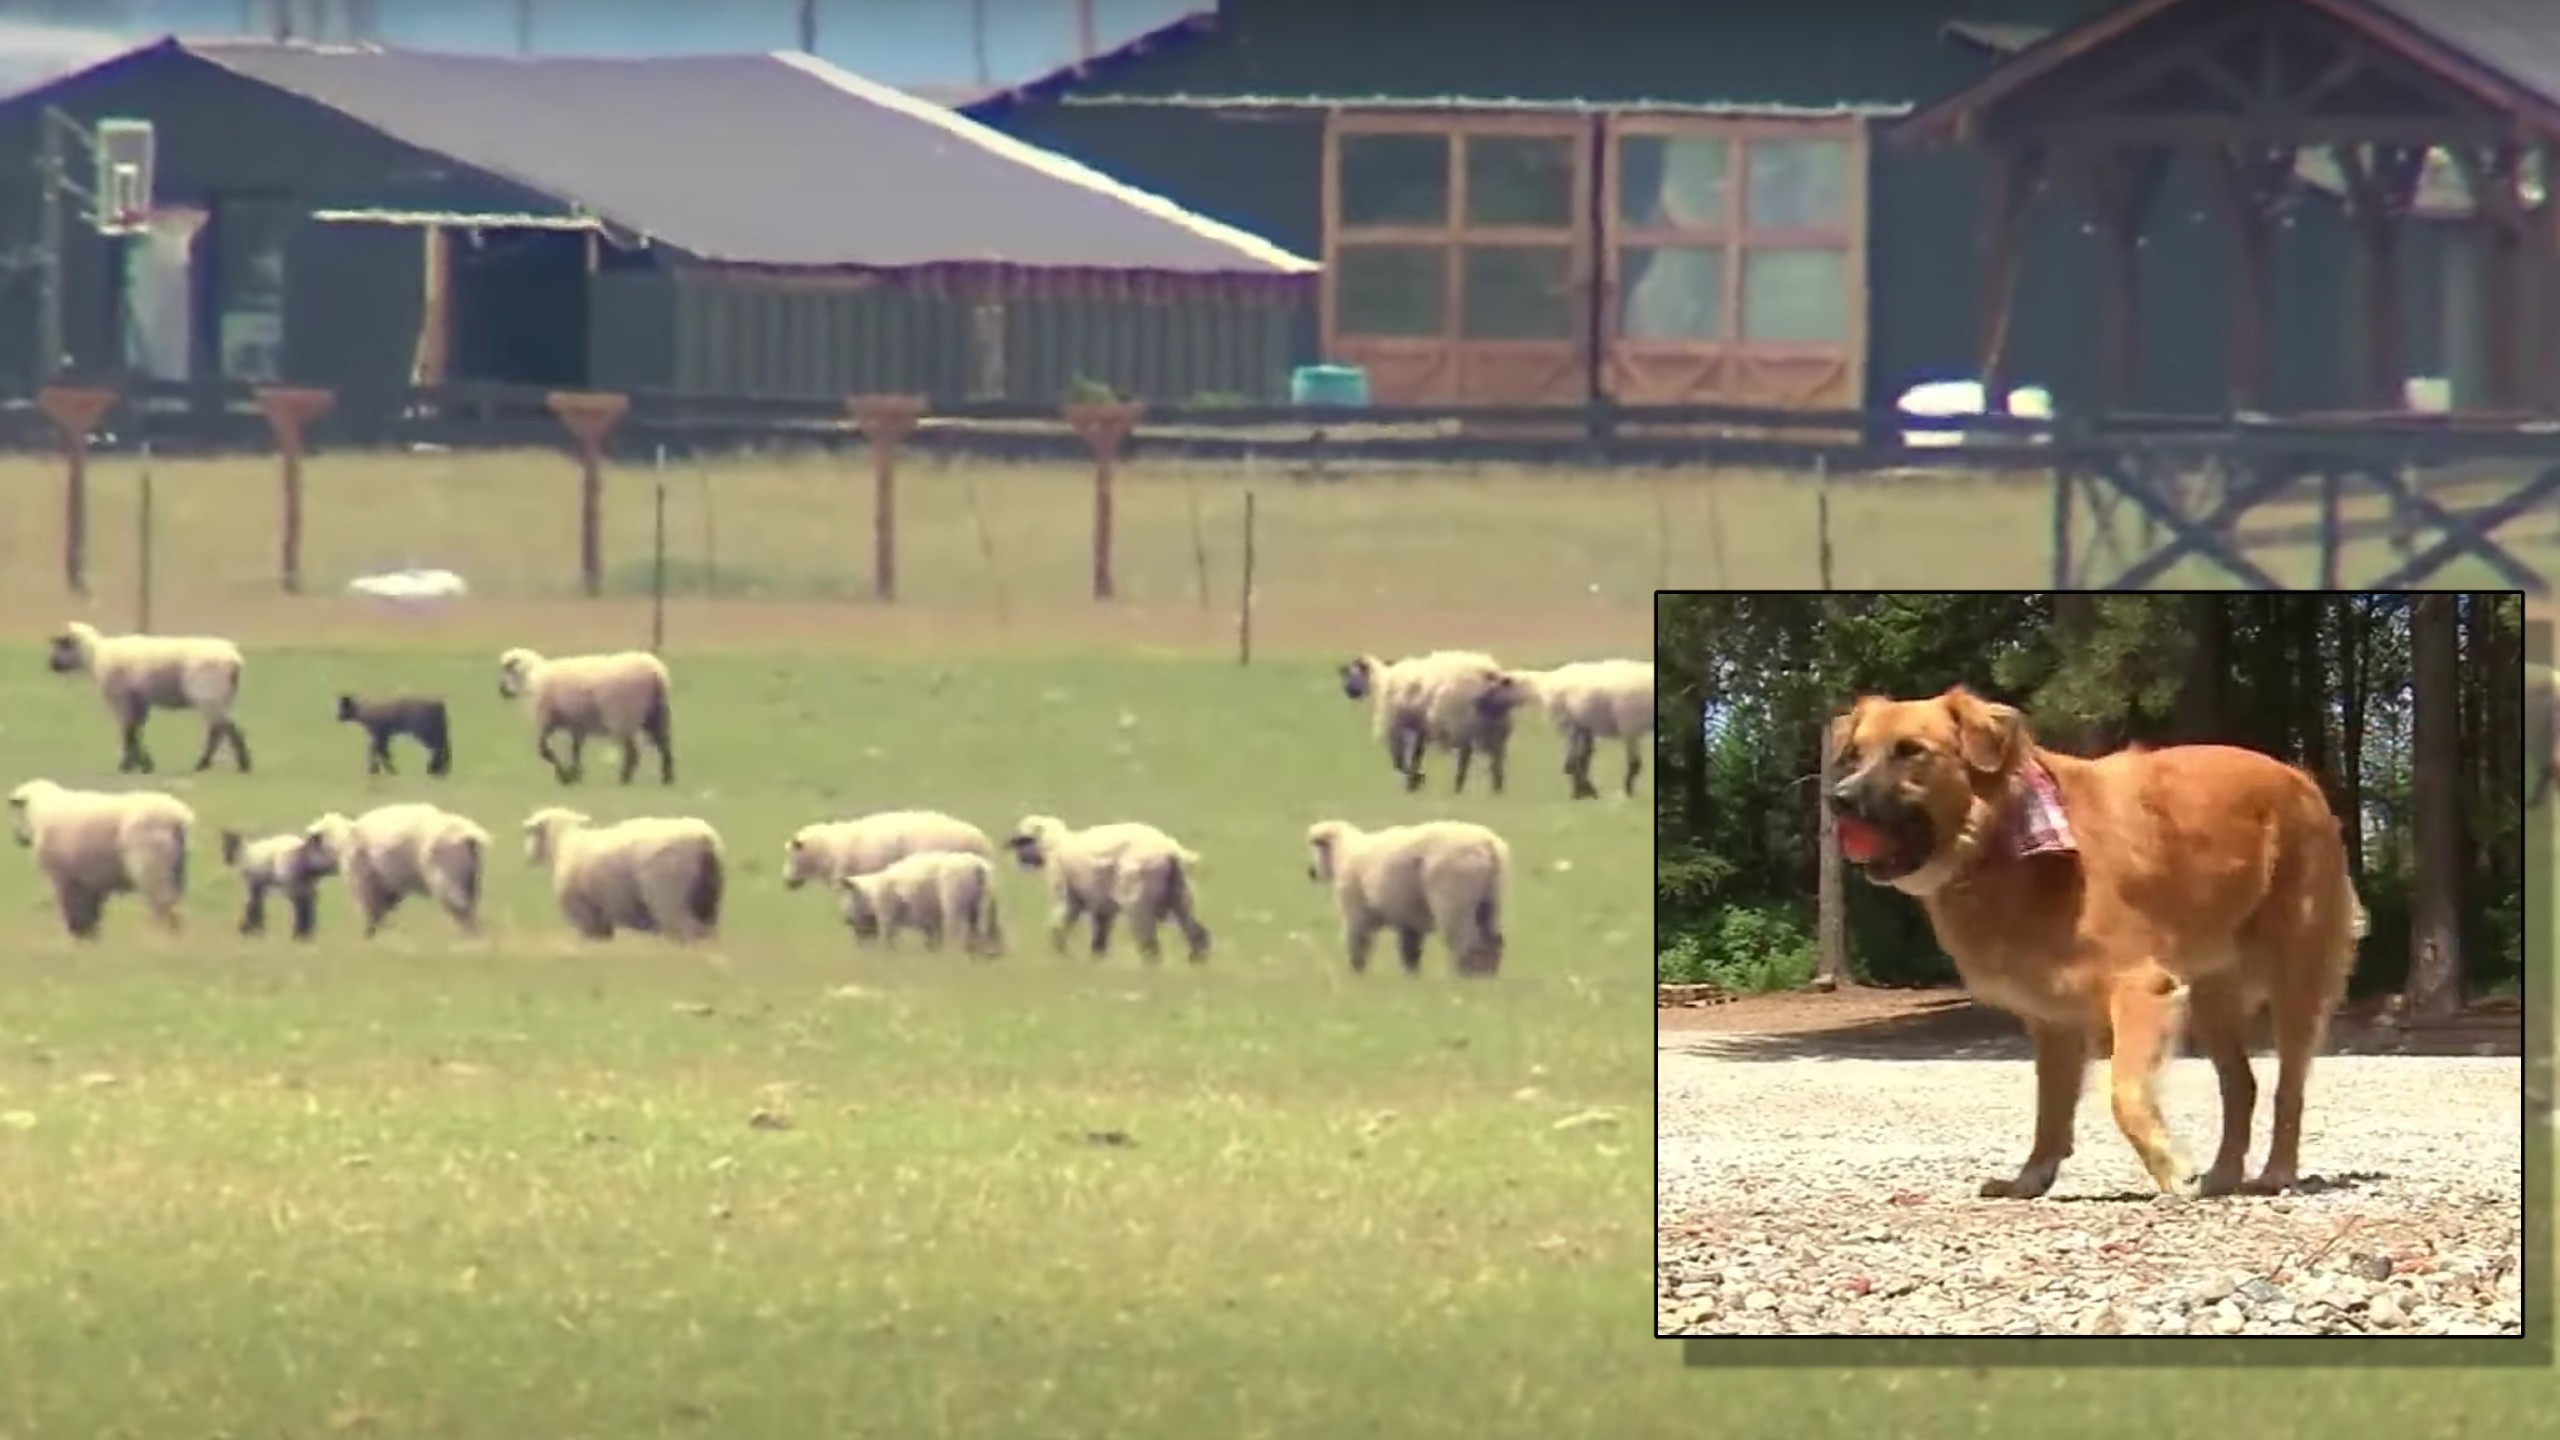 Dog found herding sheep on farm after car accident